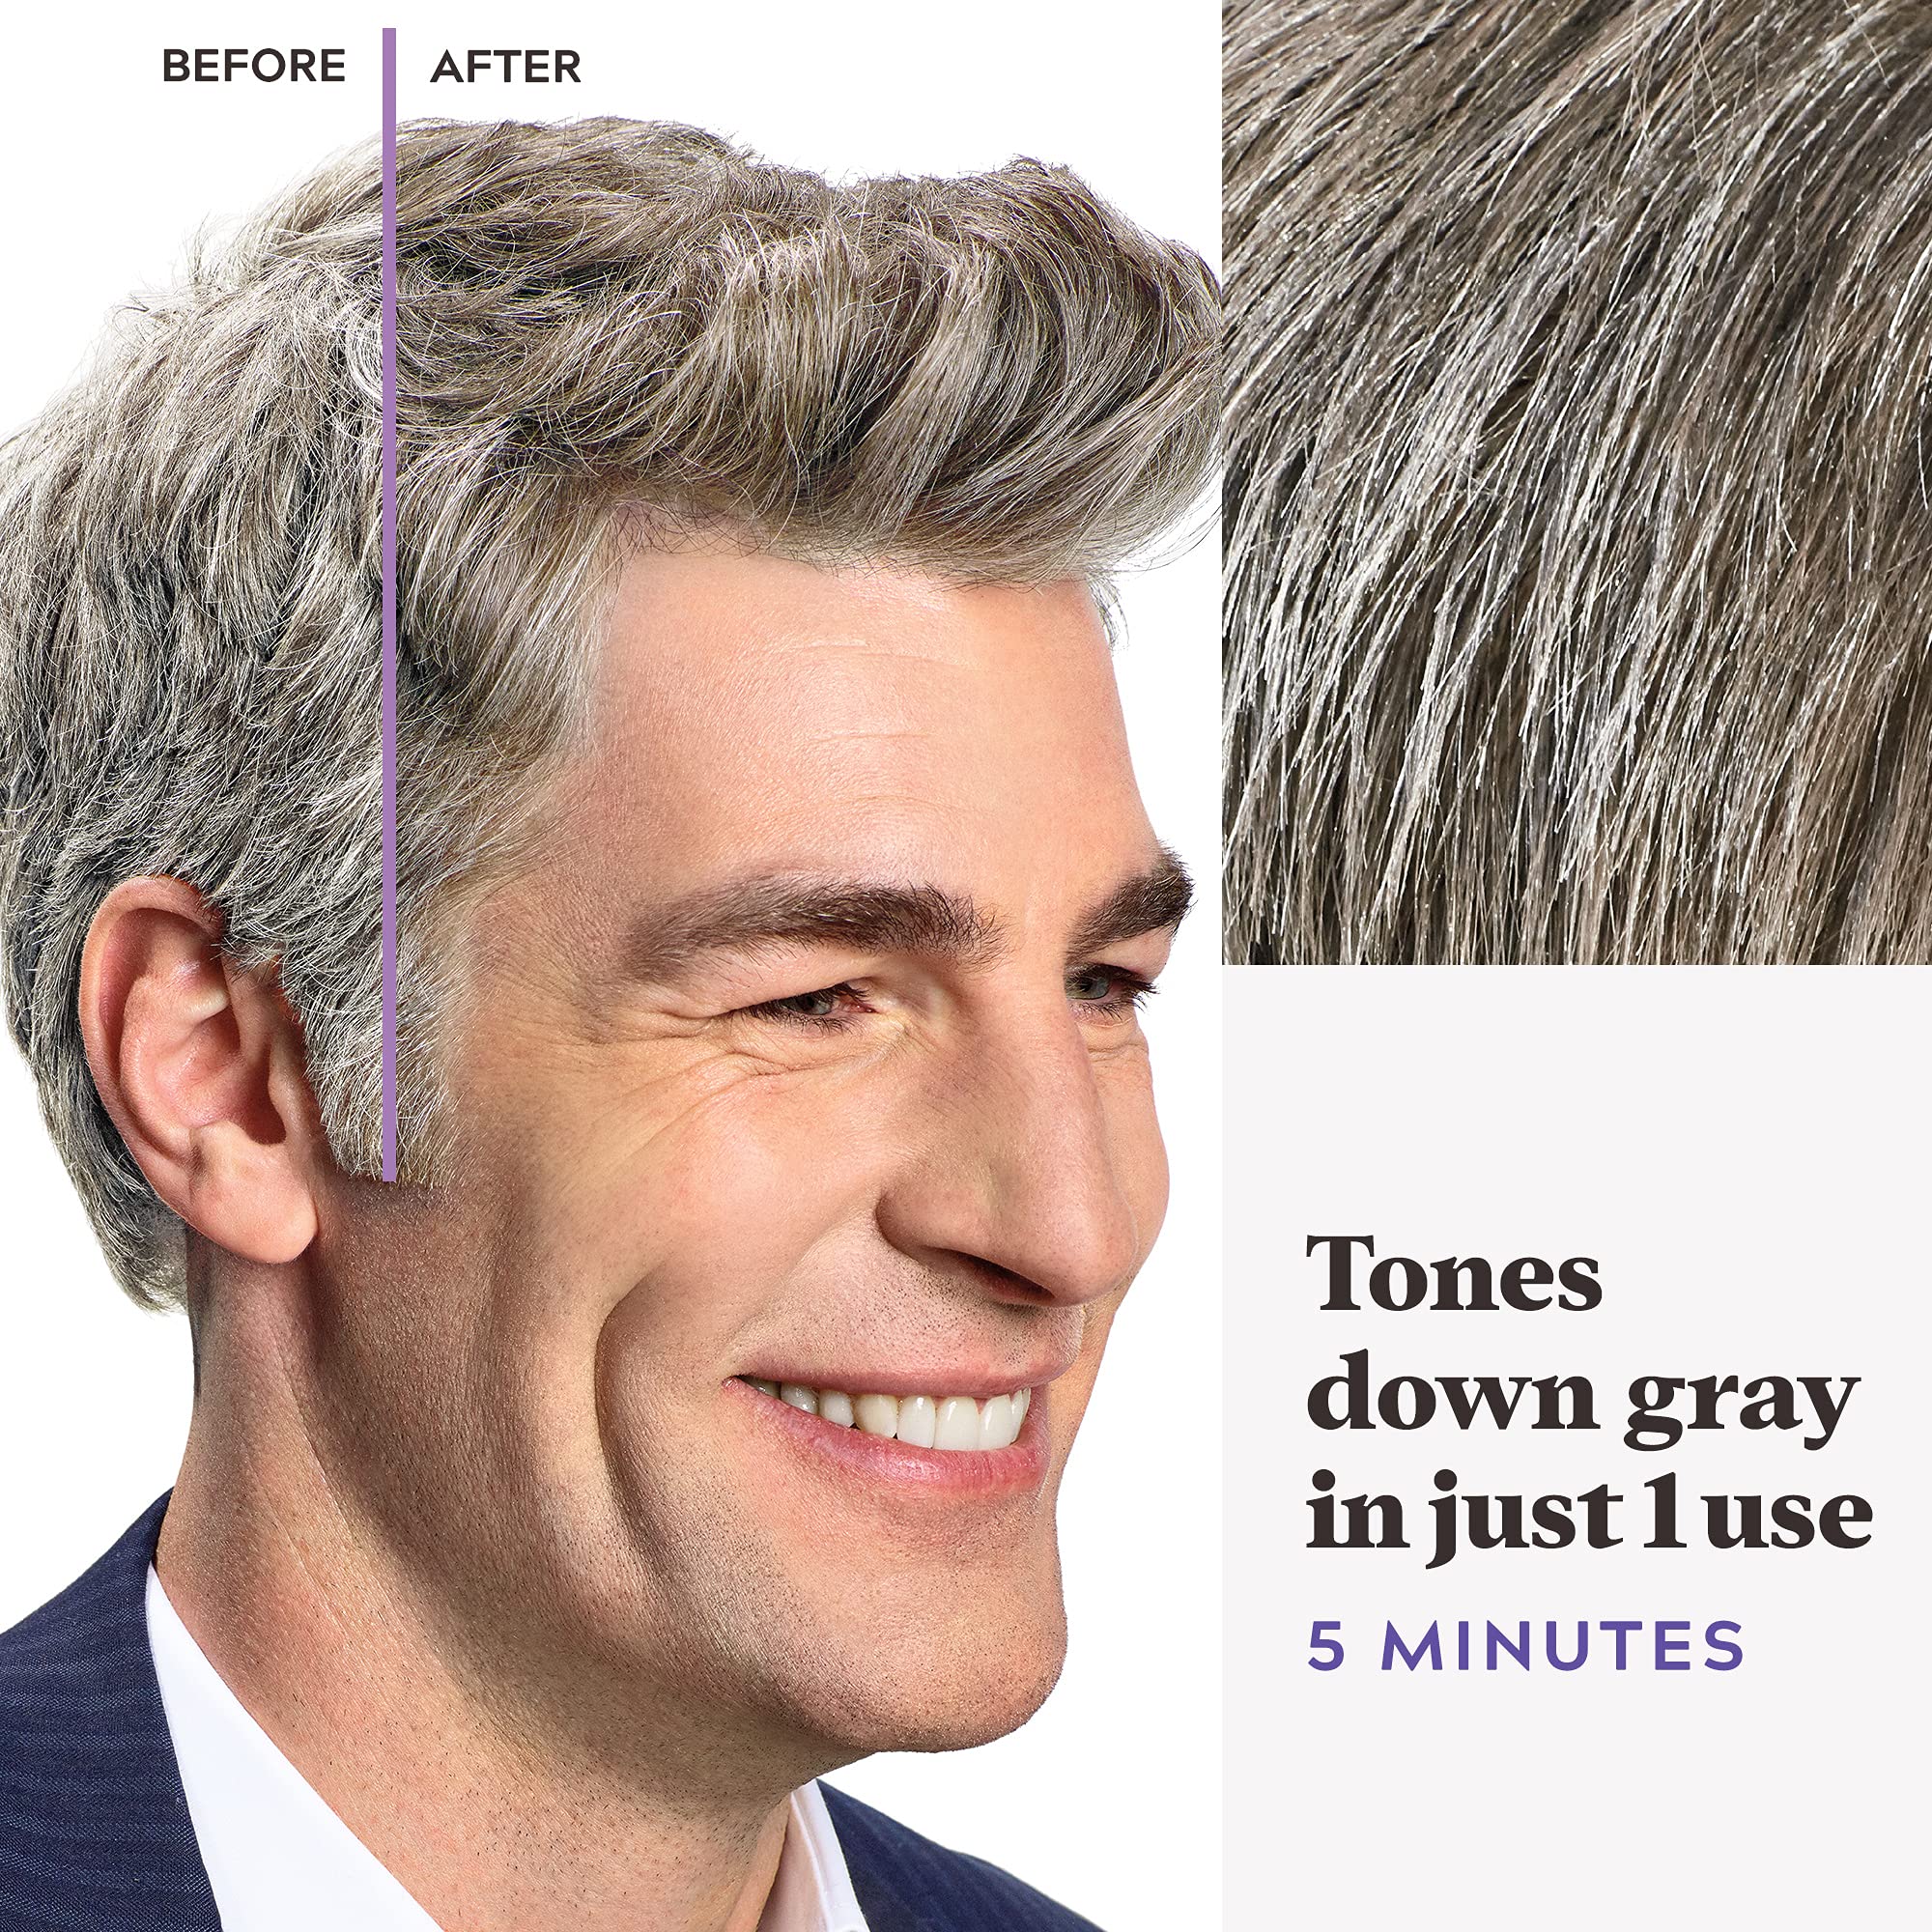 Just For Men Touch of Gray, Mens Hair Color Kit with Comb Applicator for Easy Application, Great for a Salt and Pepper Look - Light Brown, T-25, Pack of 3